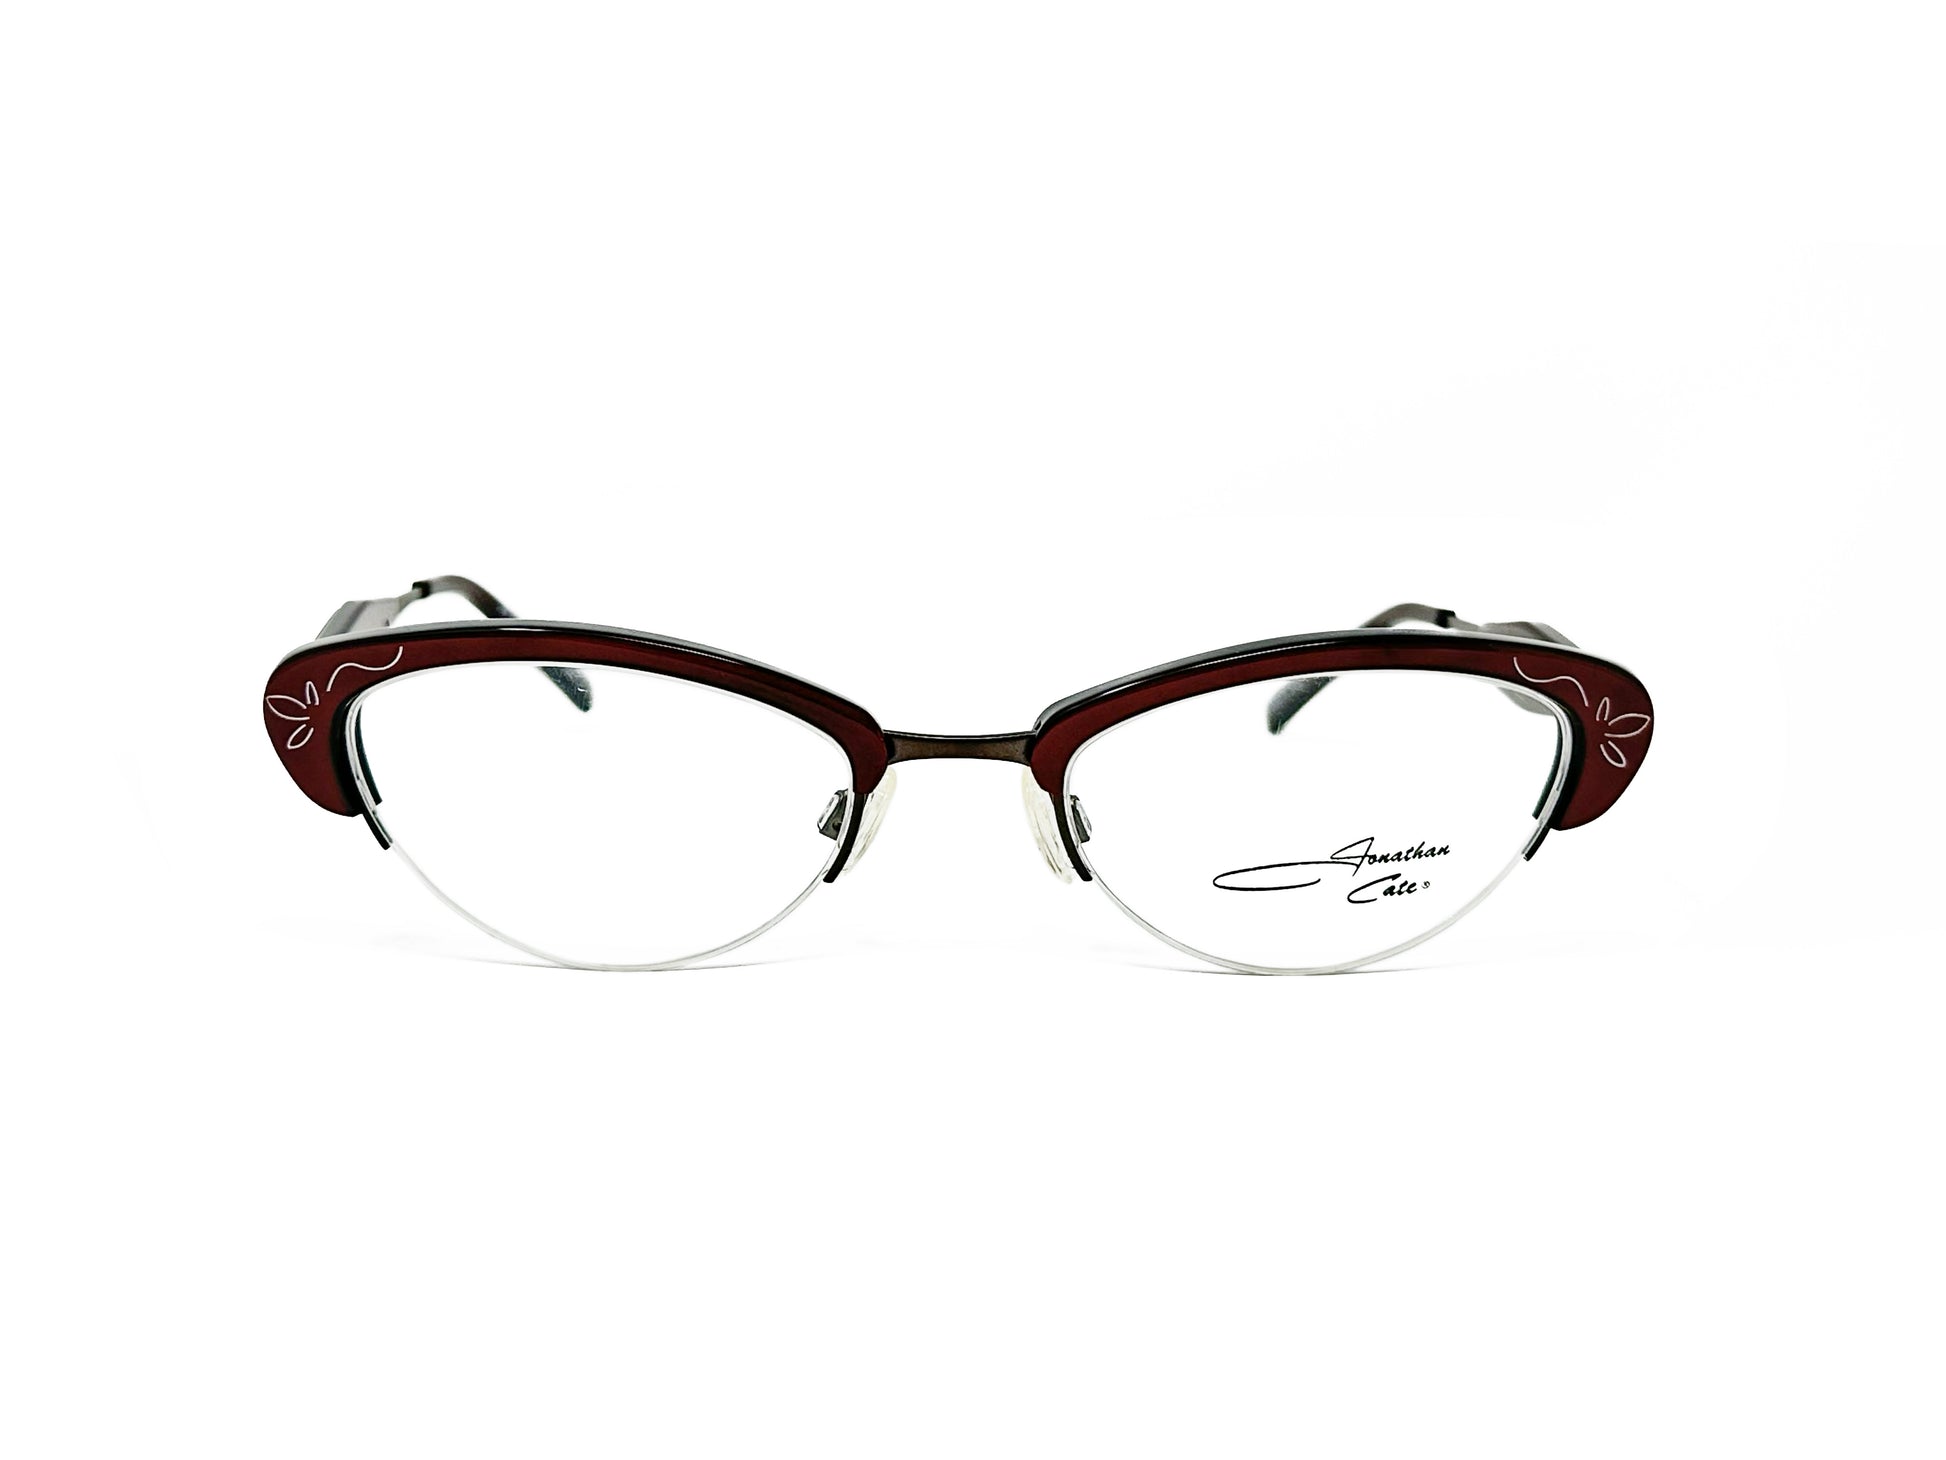 Jonathan Cate half-rim, curved, cat-eye optical frames. Model: Yakety Yak. Color: BRG - Burgundy. front view. 